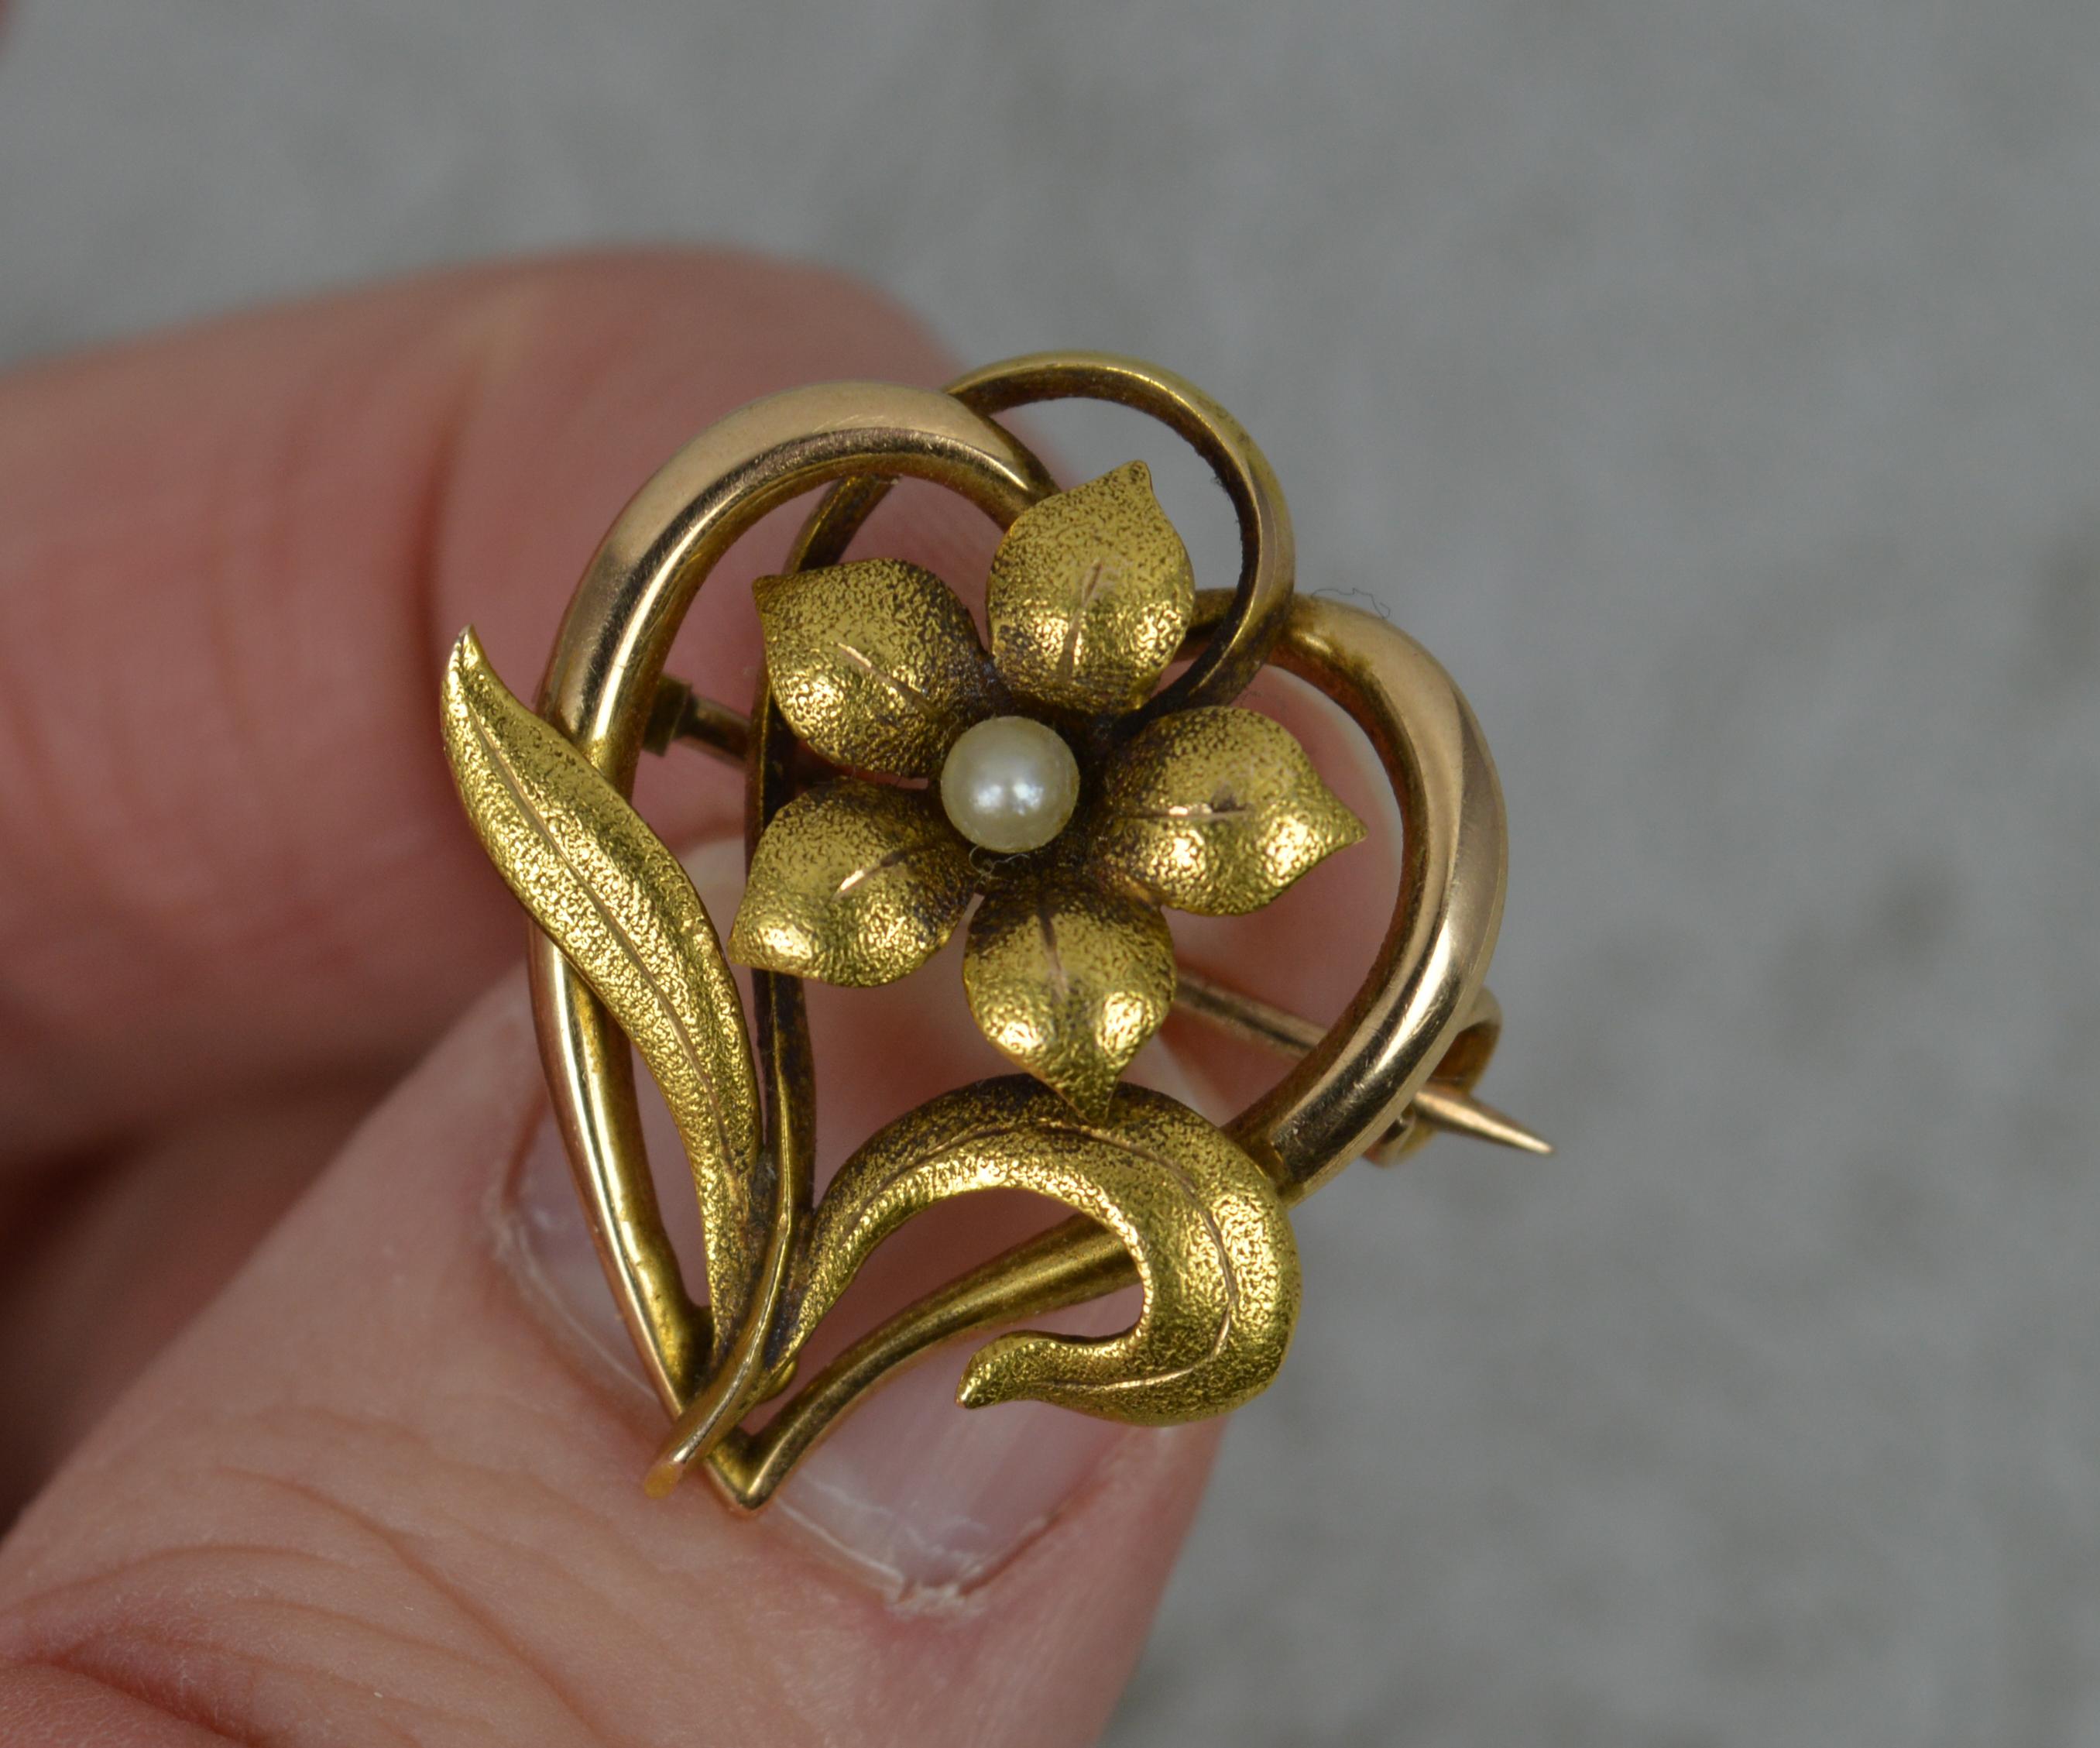 A very fine art nouveau period brooch.
Solid 15 carat yellow gold example.
Floral or heart shape with forget me not flower to centre with pearl to middle of the head.

Condition ; Very good. Crisp pattern. Working pin and hinge. Clean pearl. Please